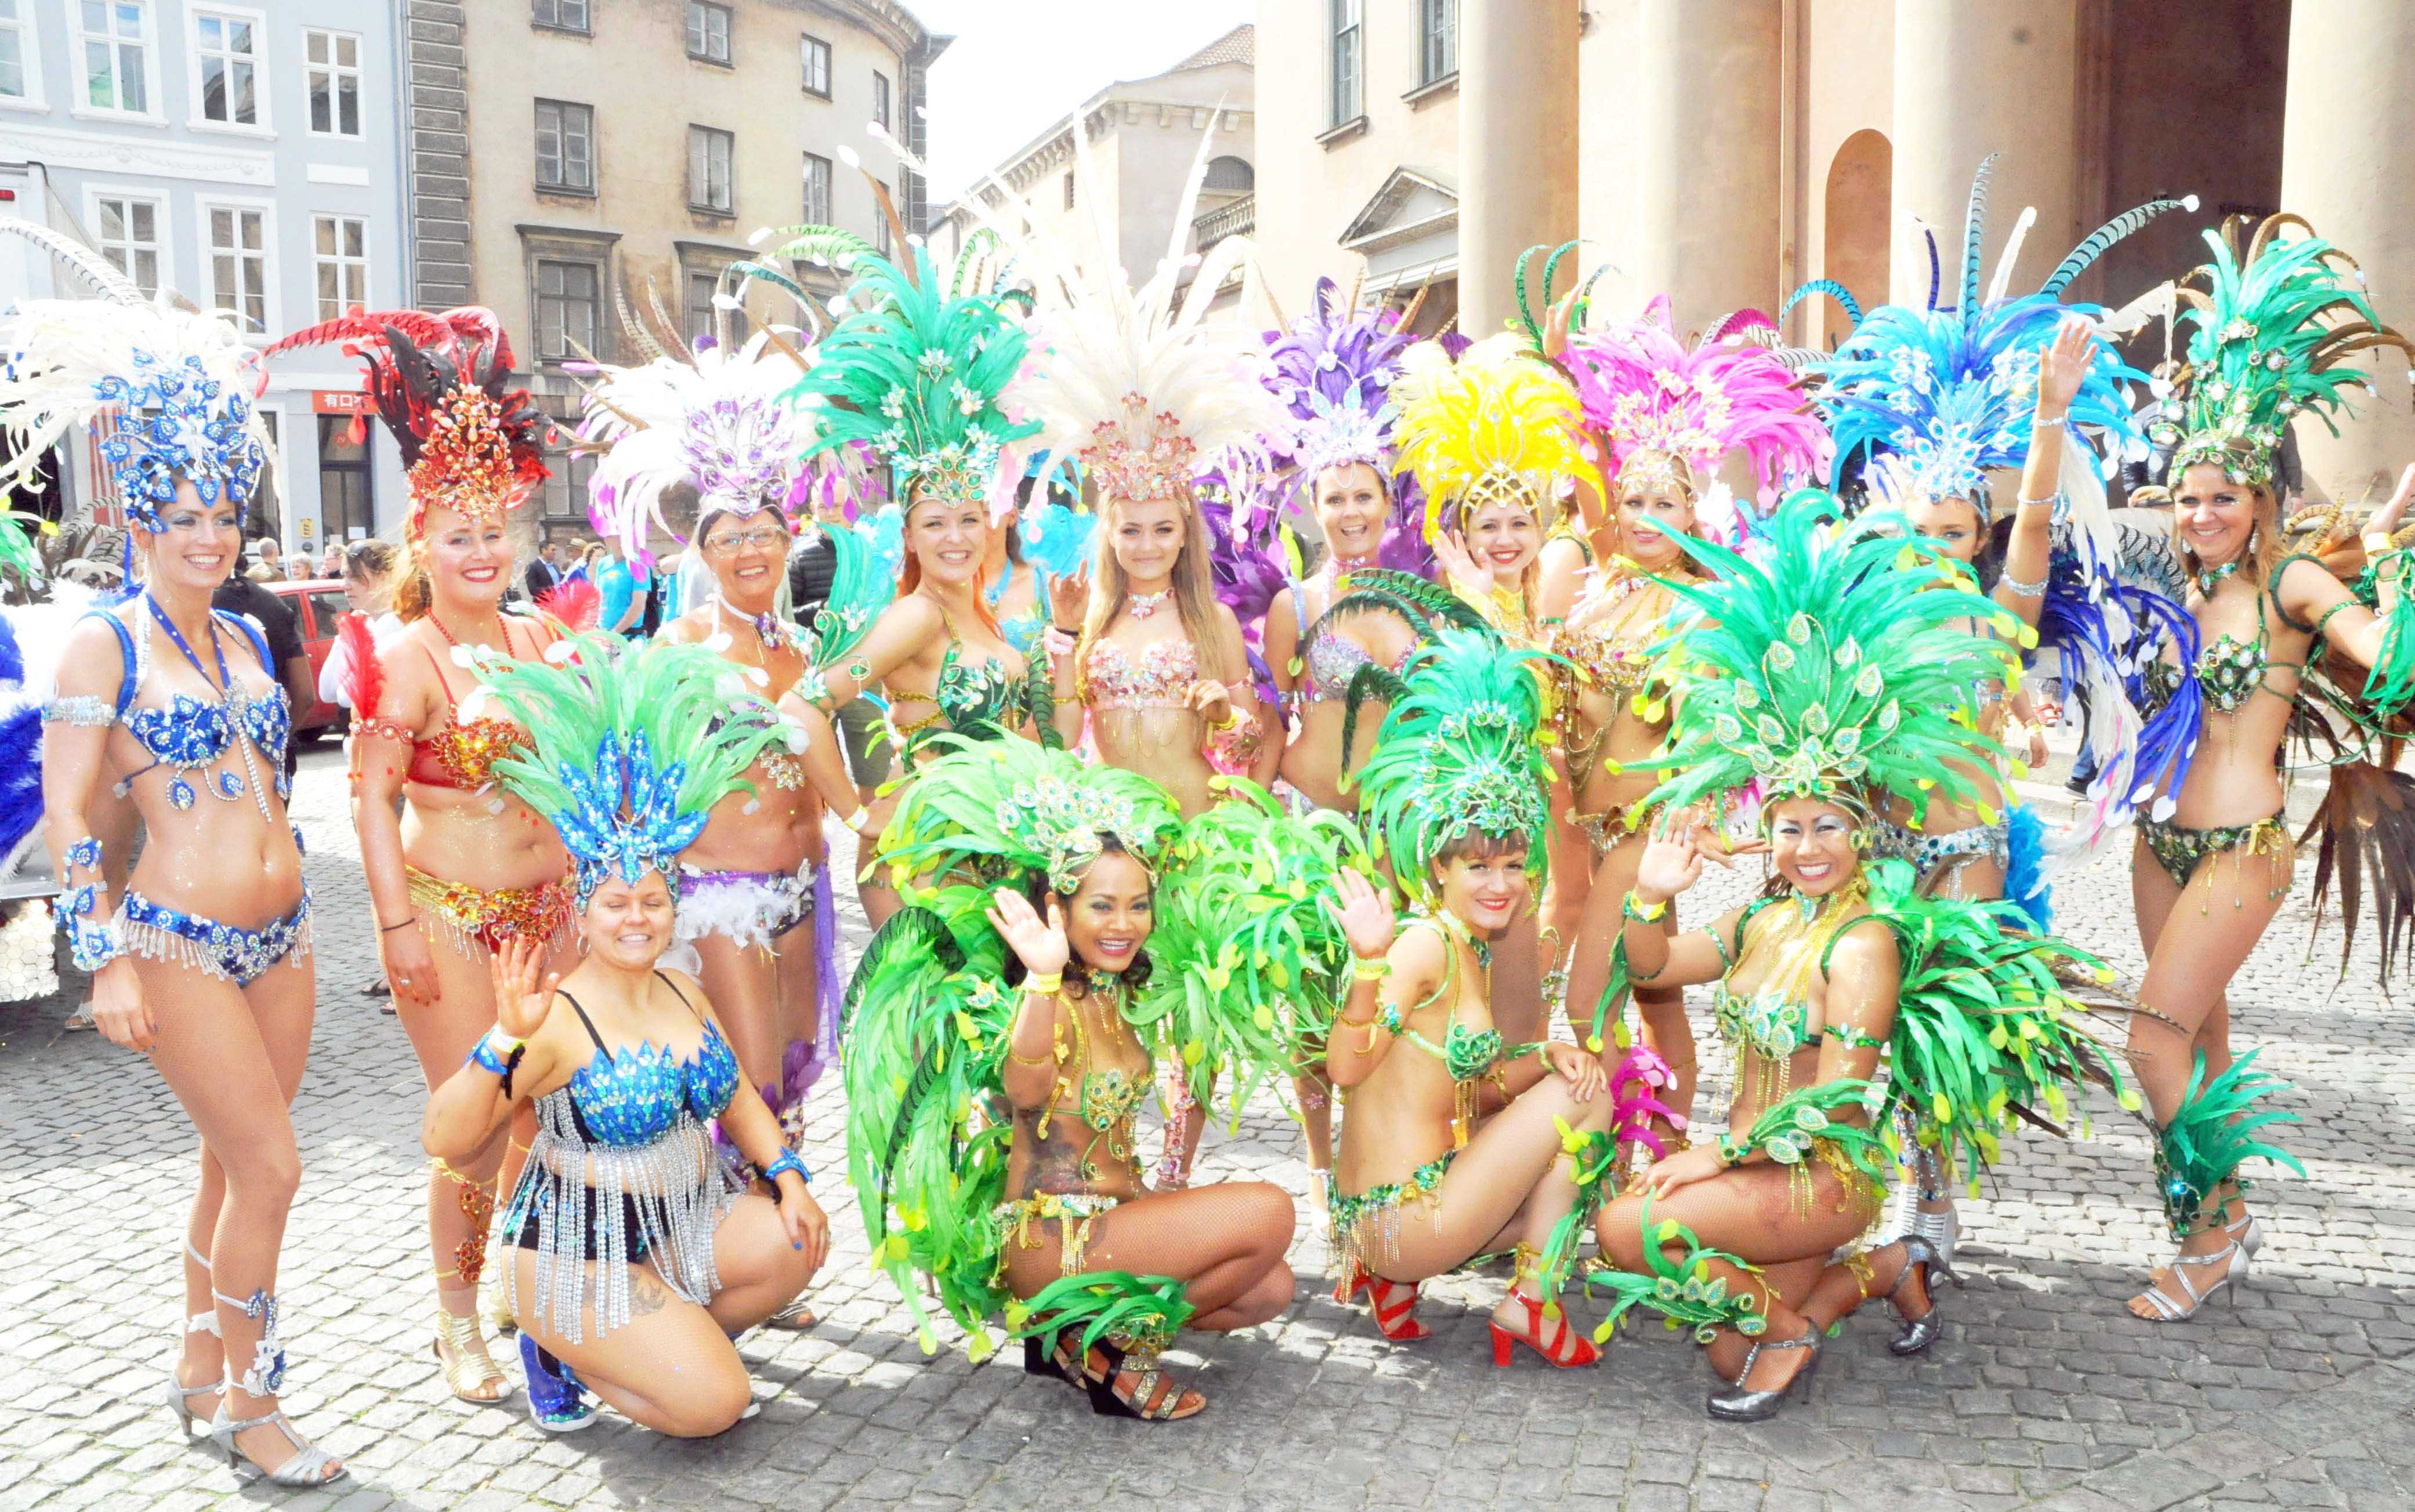 Out and about: Putting their best foot forward at Carnival